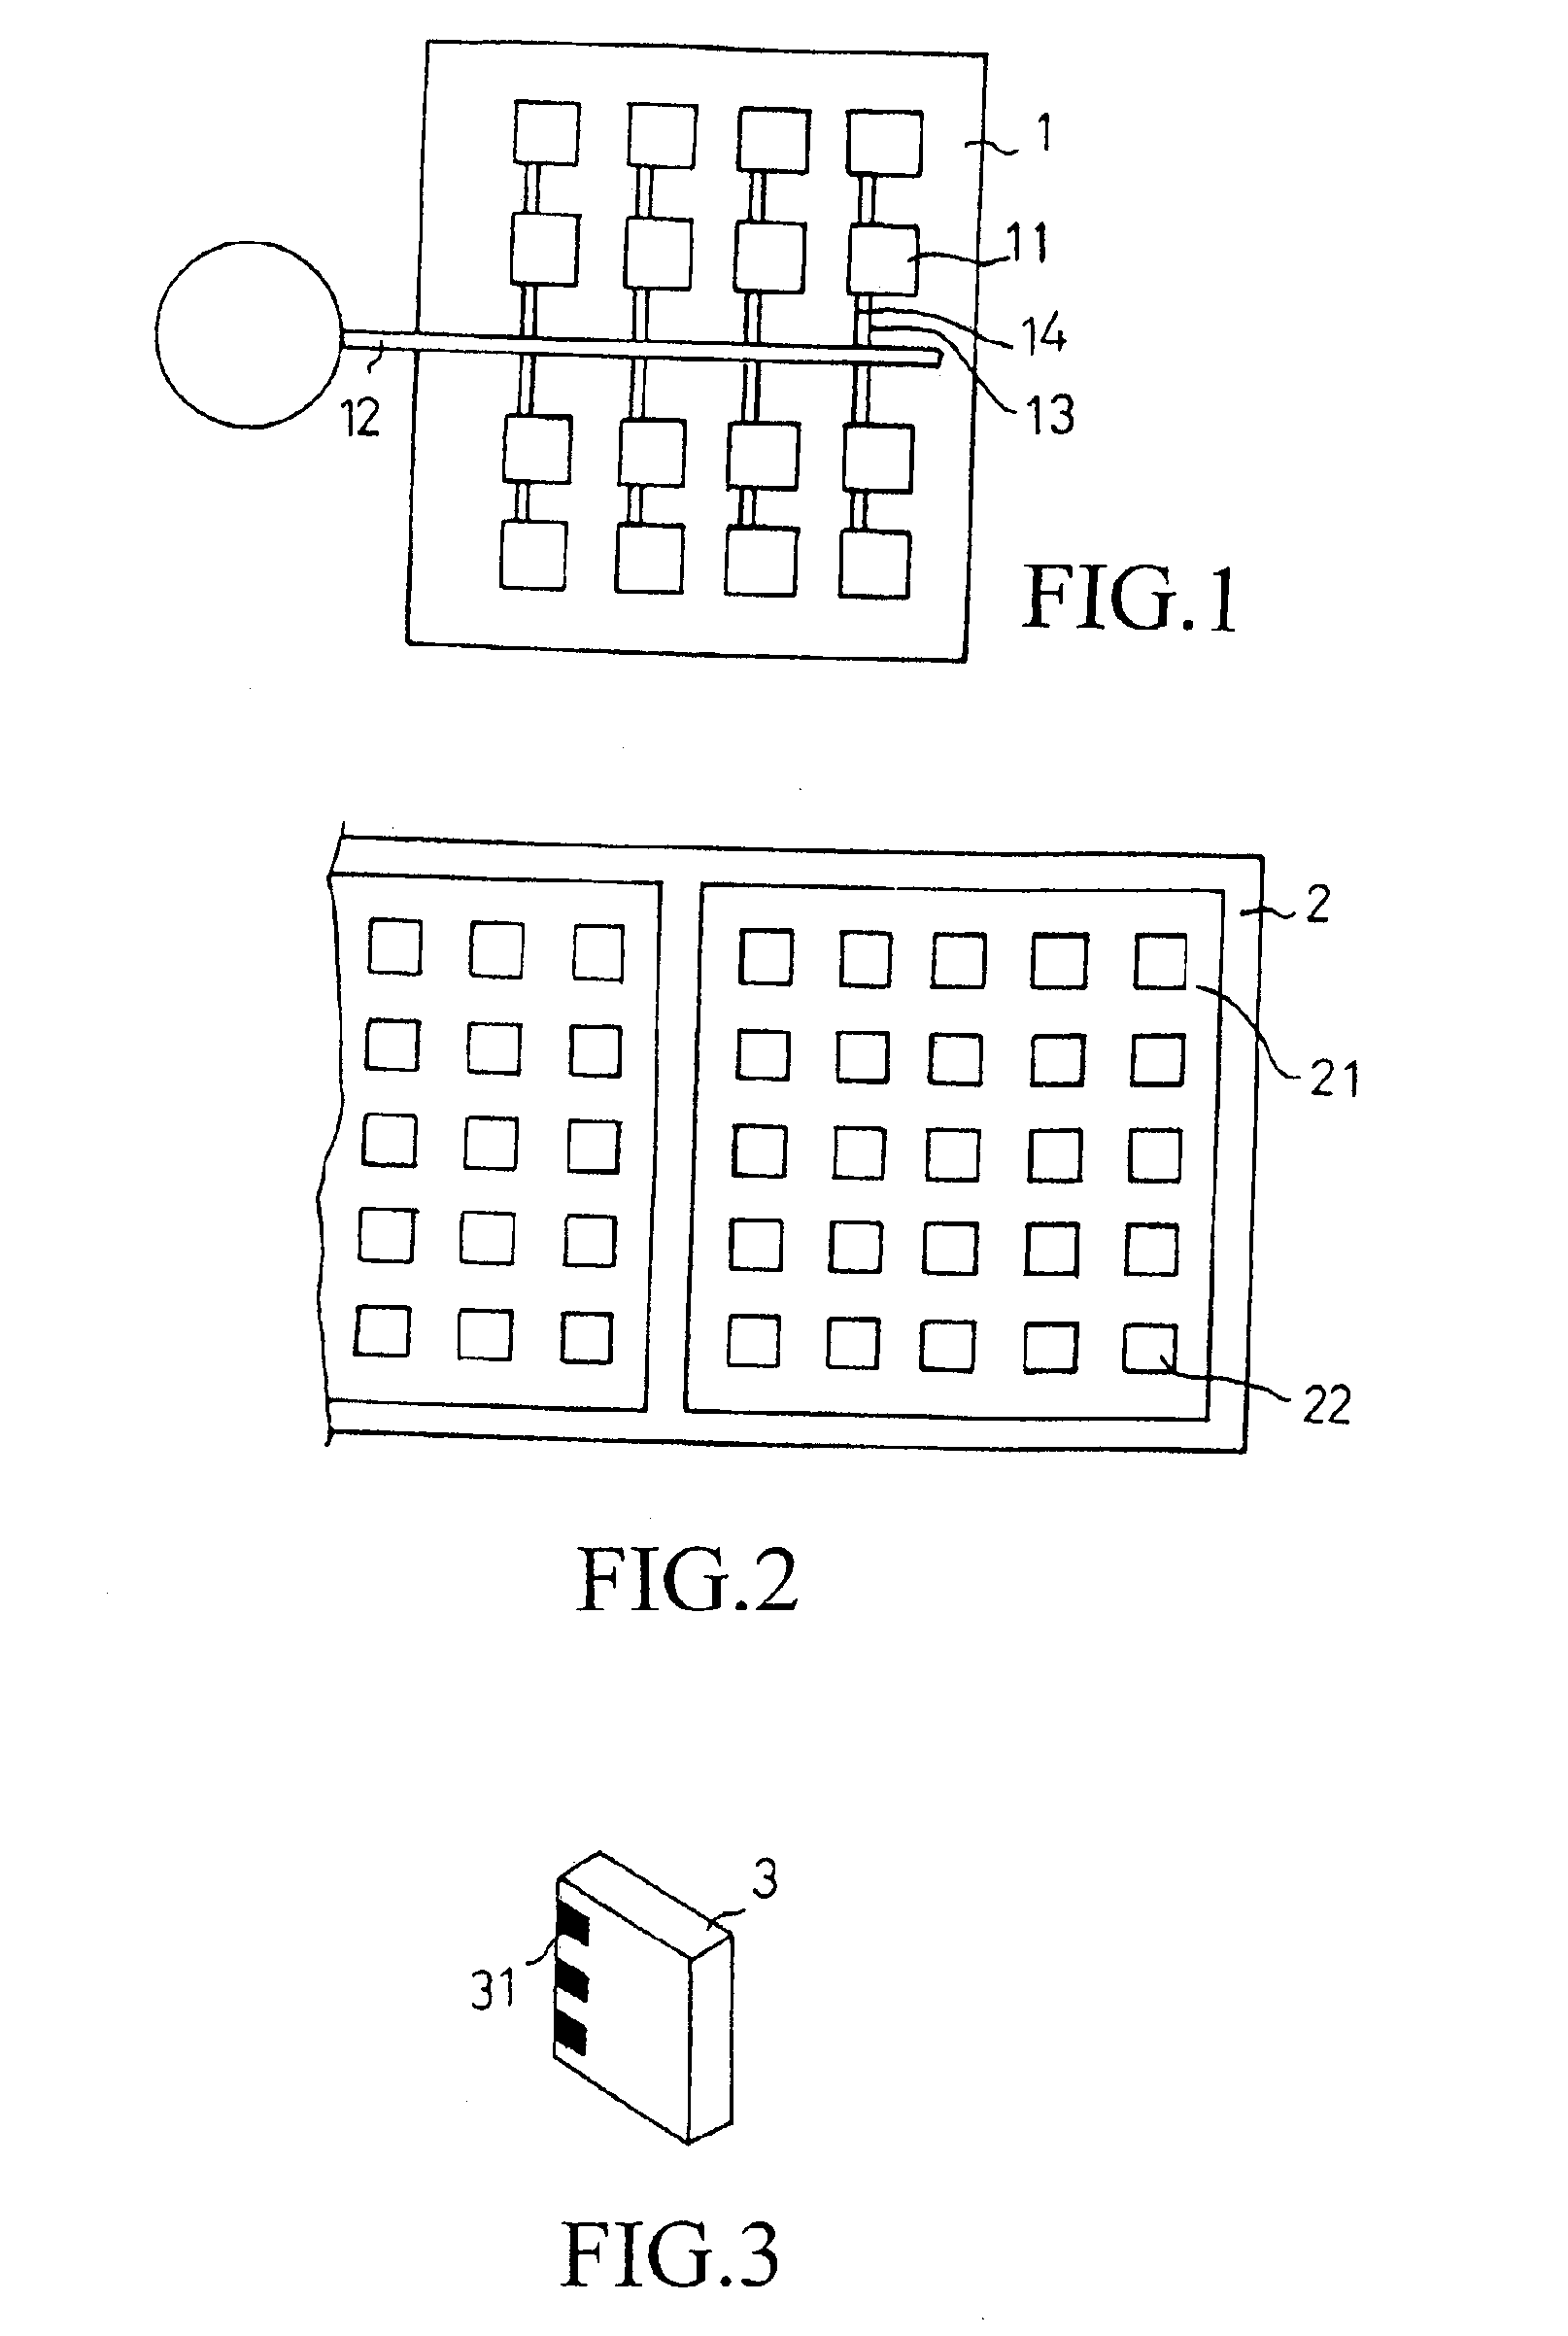 Encapsulation method and leadframe for leadless semiconductor packages